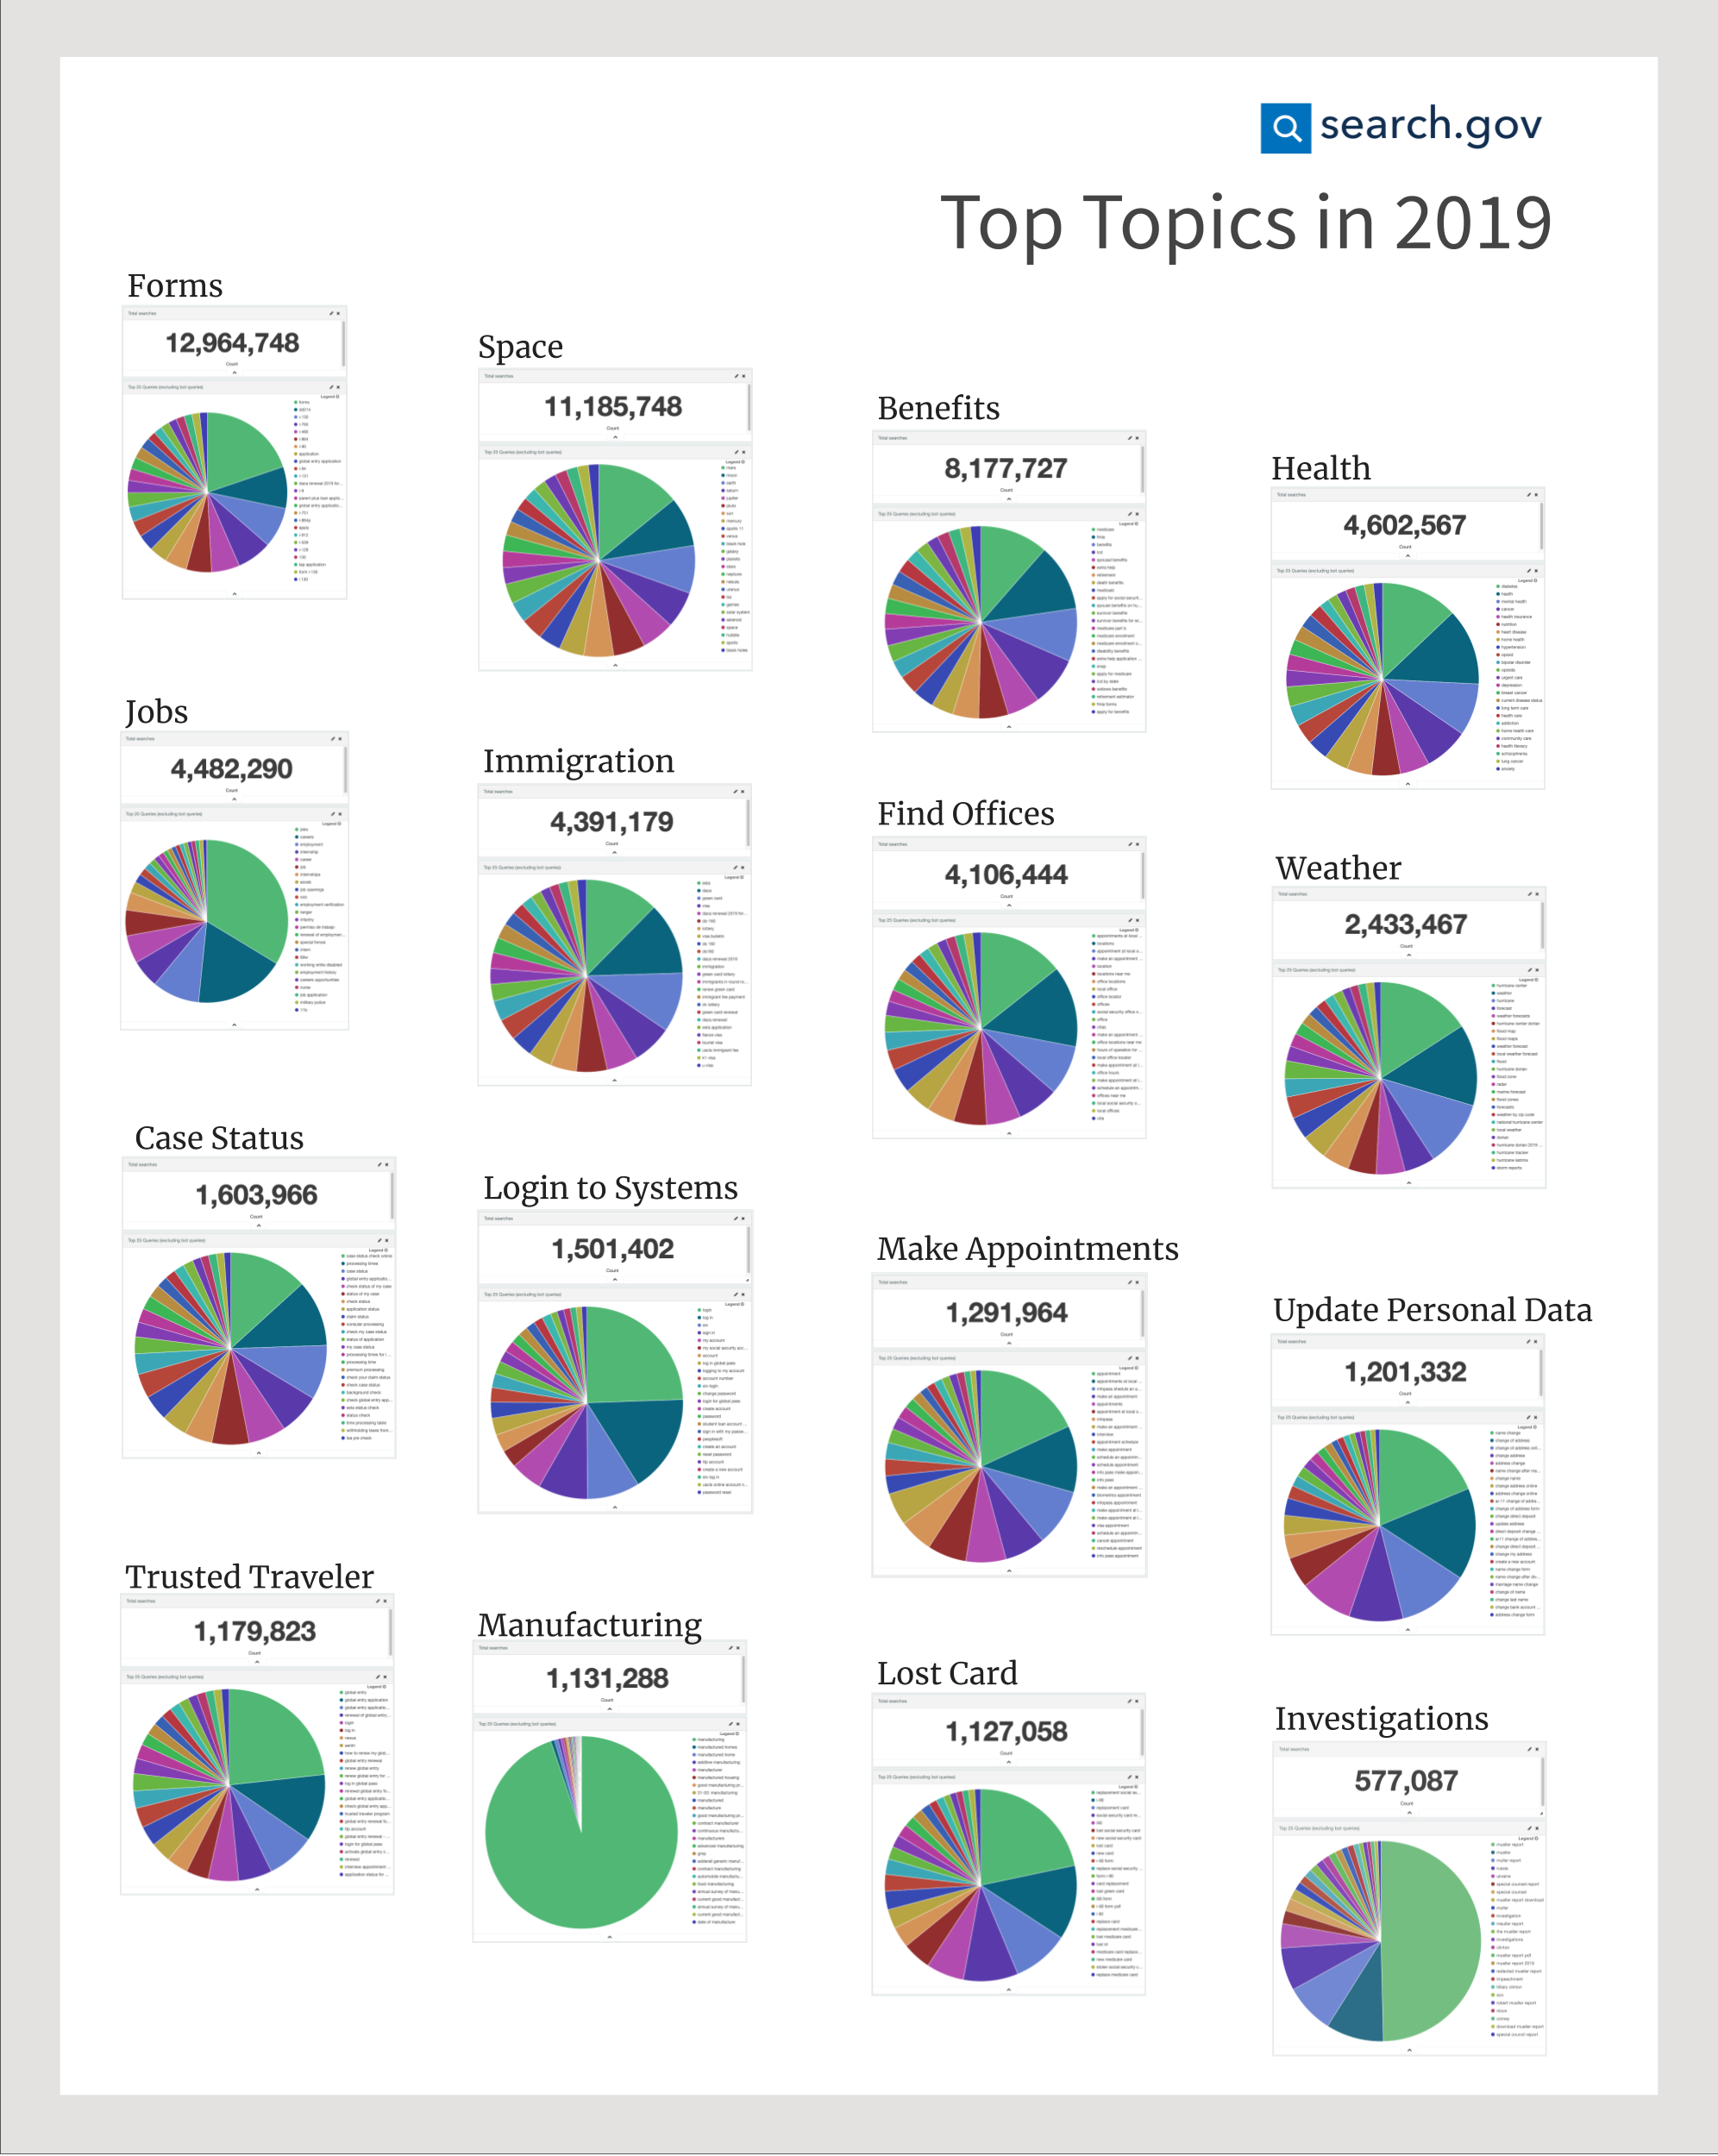 Top Topics in 2019 poster, small version. Following is a link to a larger PDF version. The poster shows a set of 16 pie charts, one for each top topic. The pie charts show the details of the top 25 queries run in 2019 for that topic.